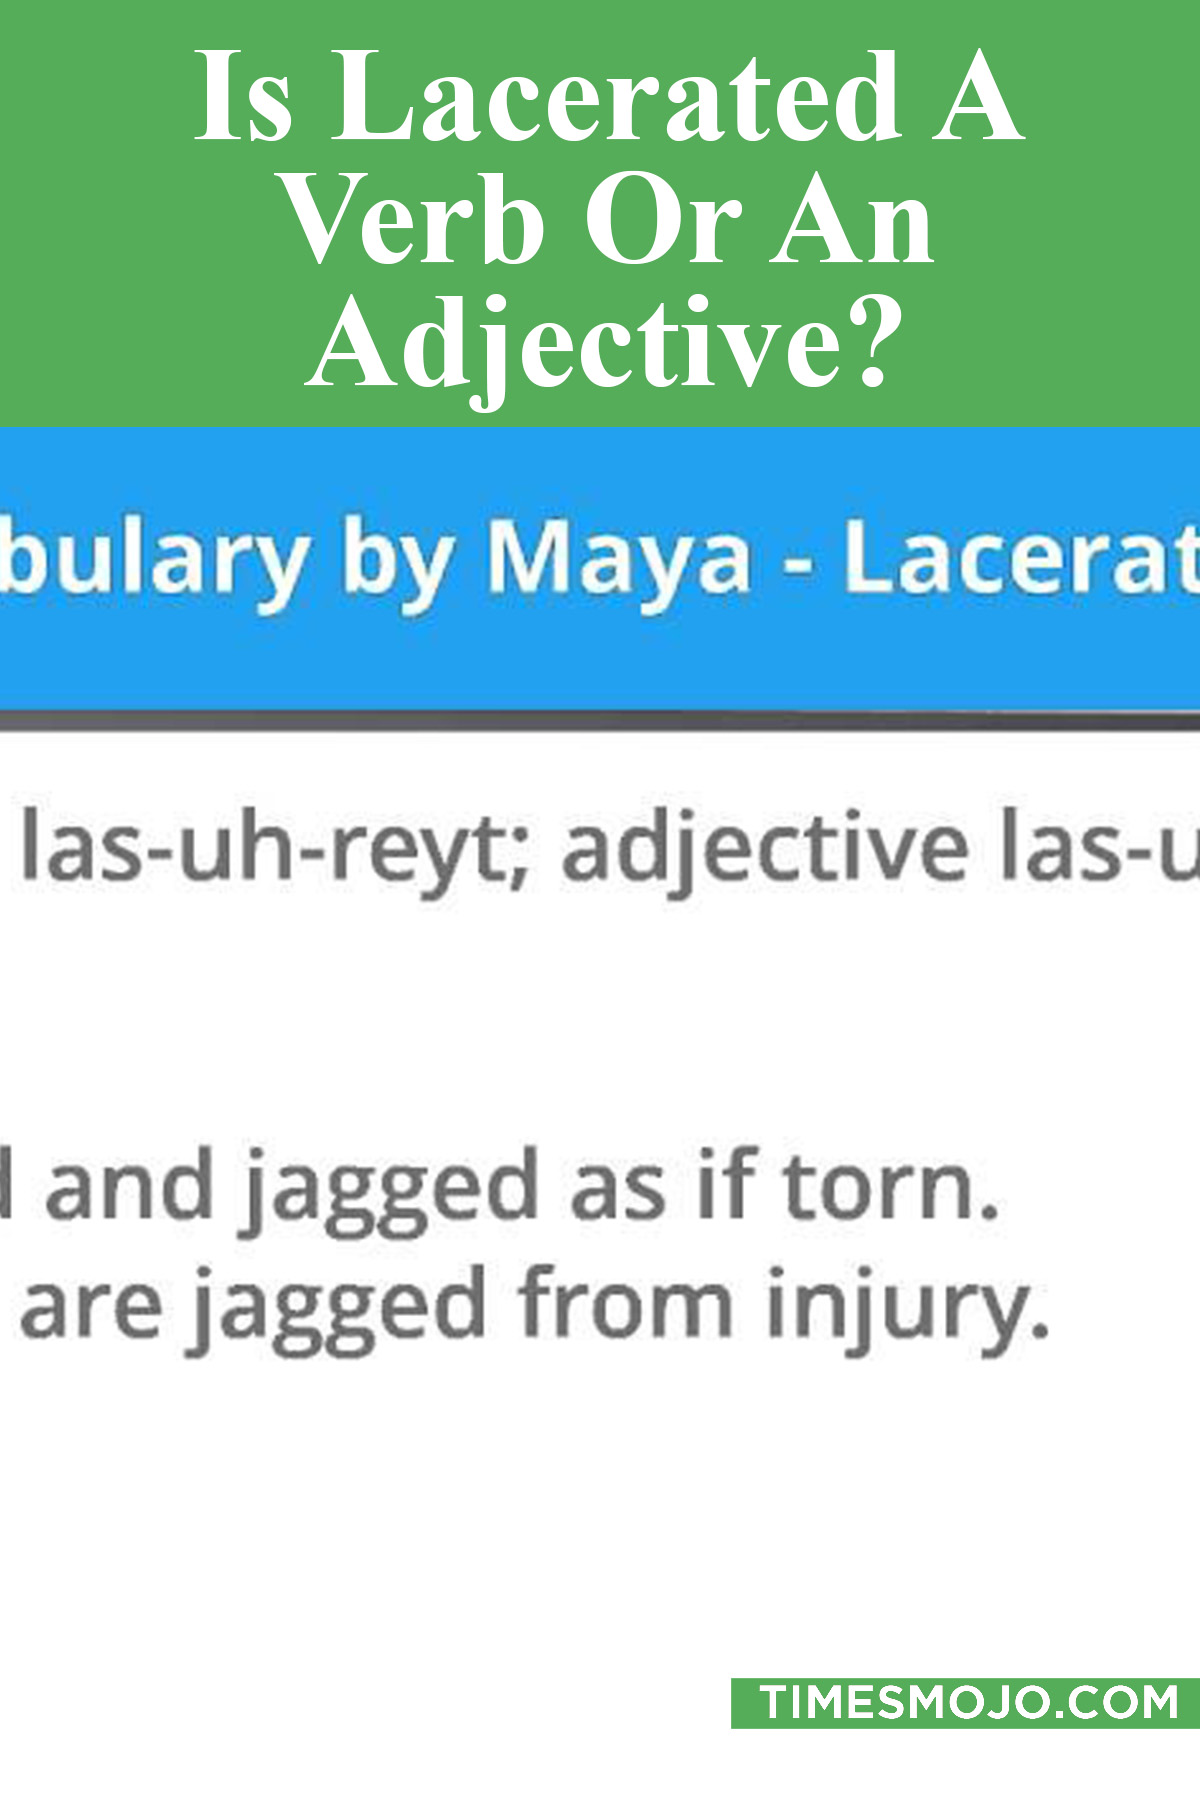 is-lacerated-a-verb-or-an-adjective-timesmojo